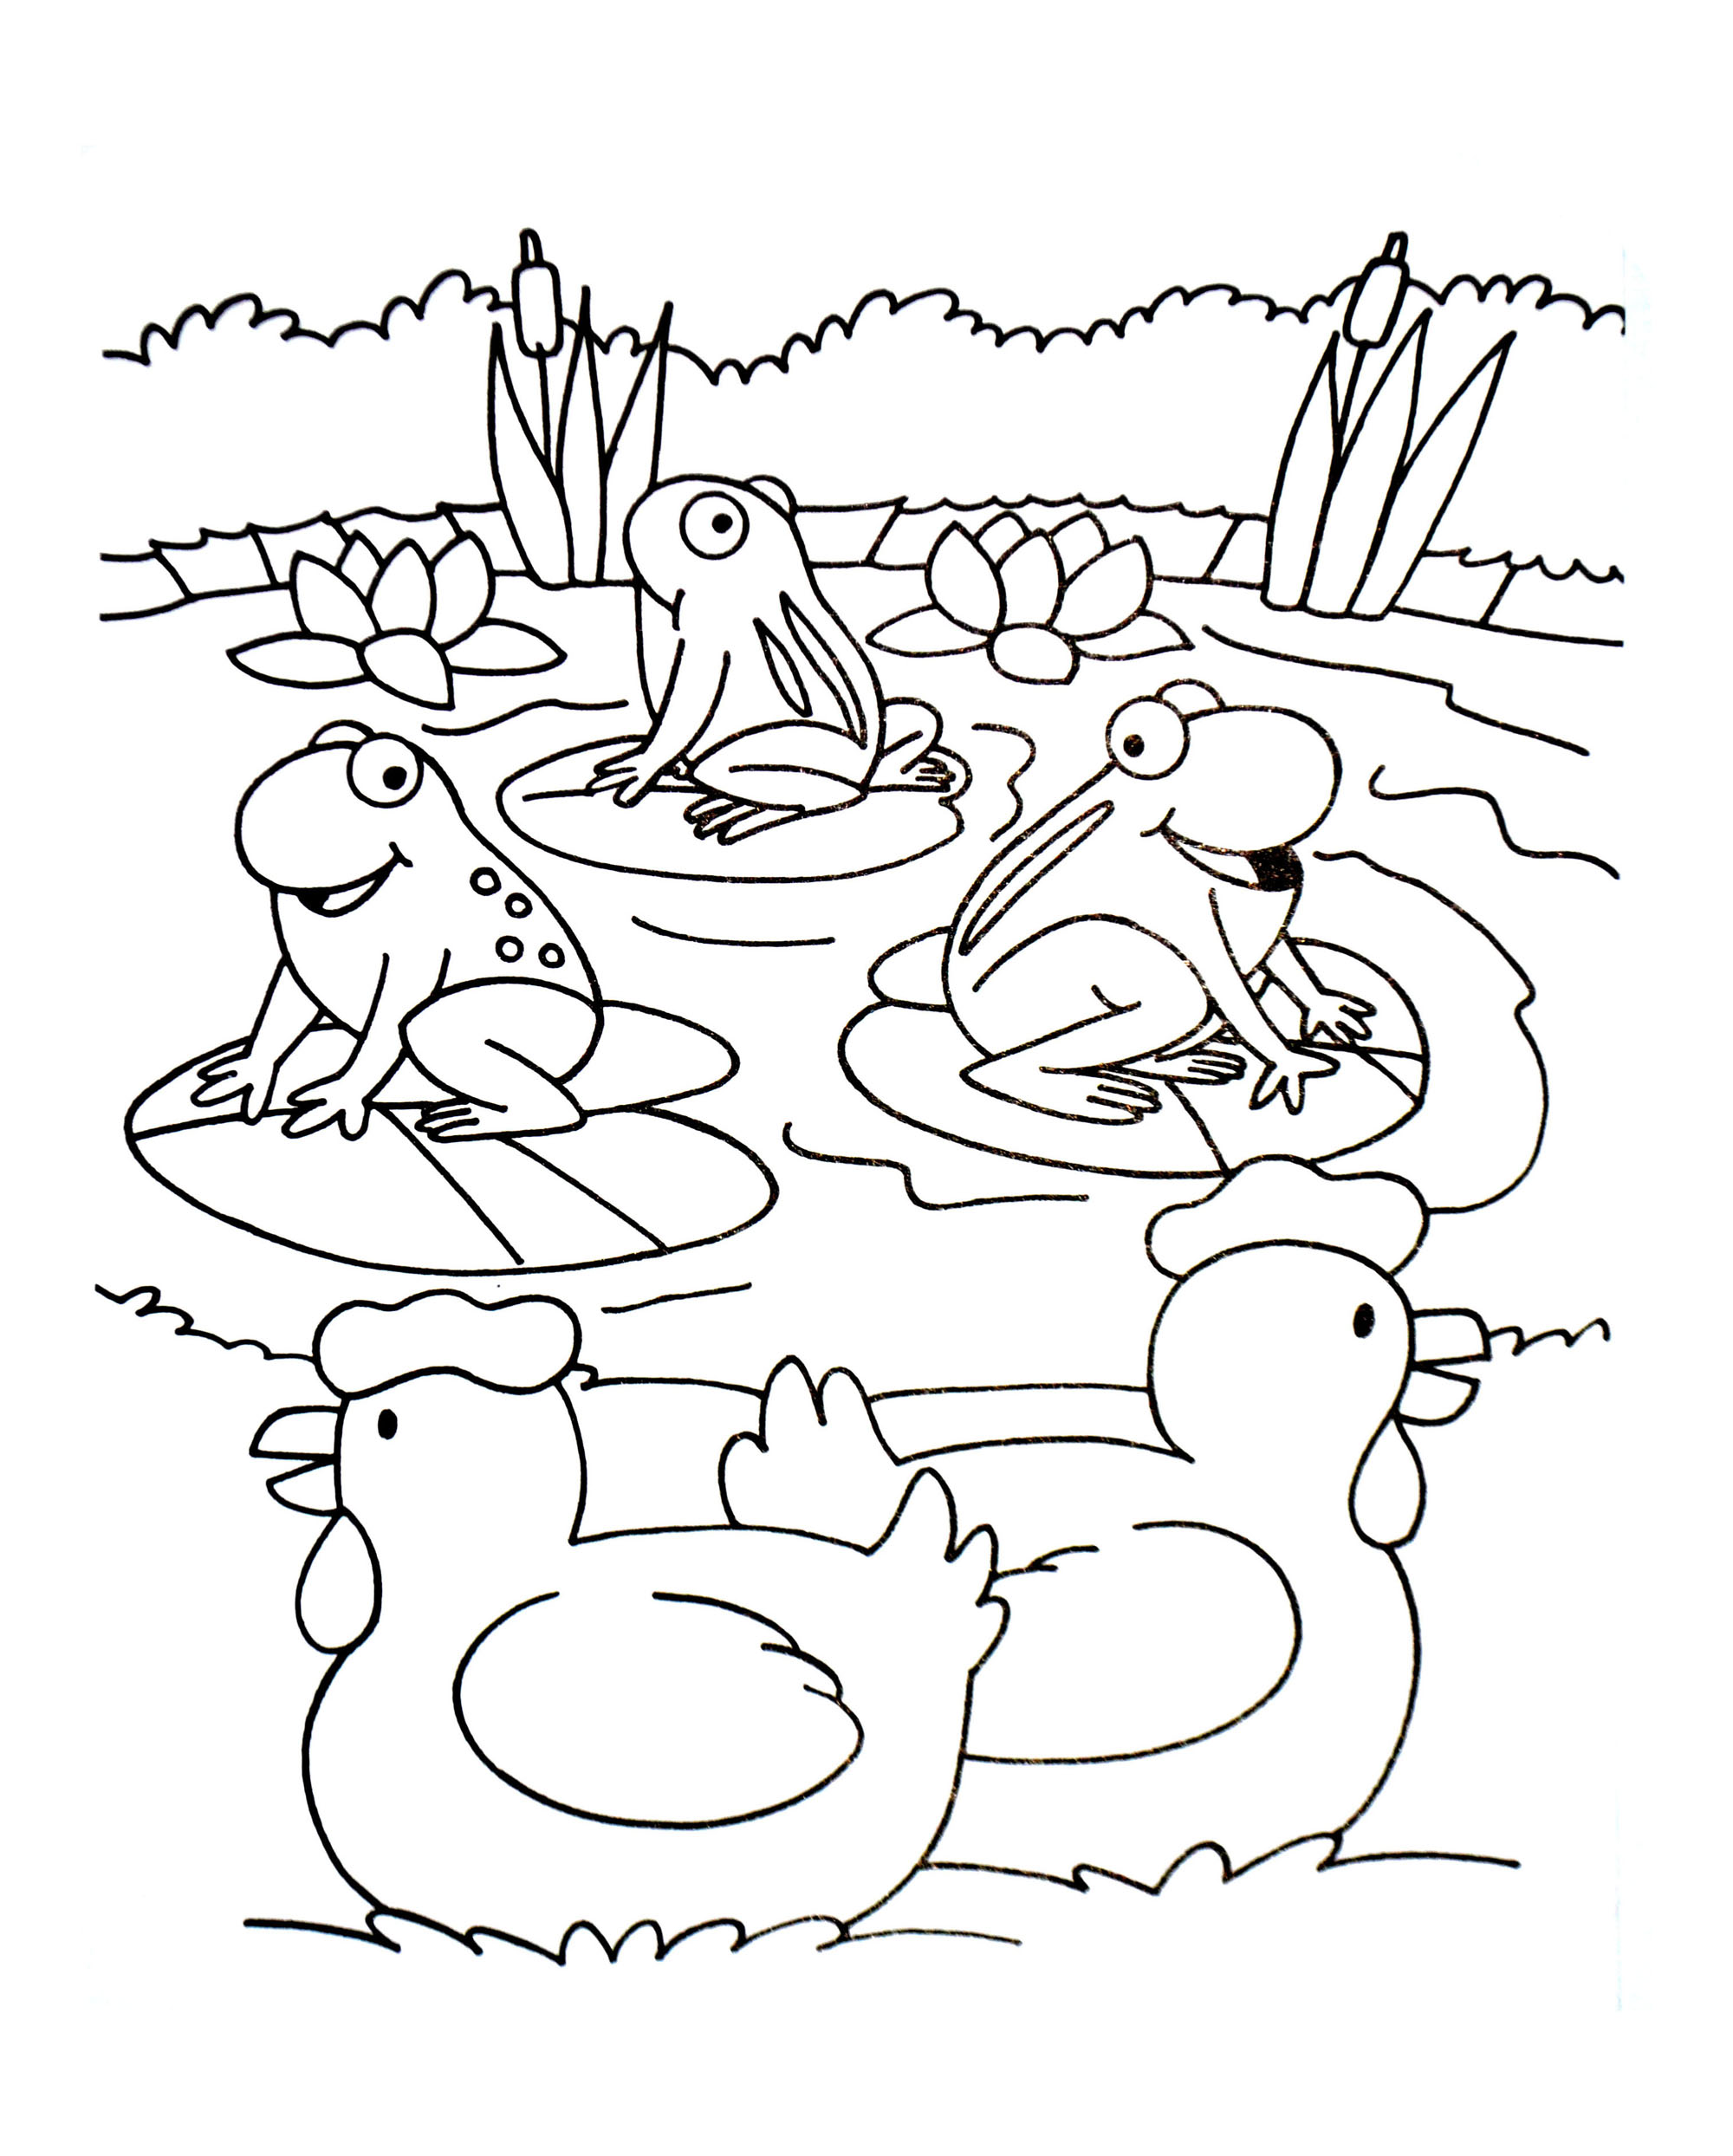 Farm image to color, easy for kids